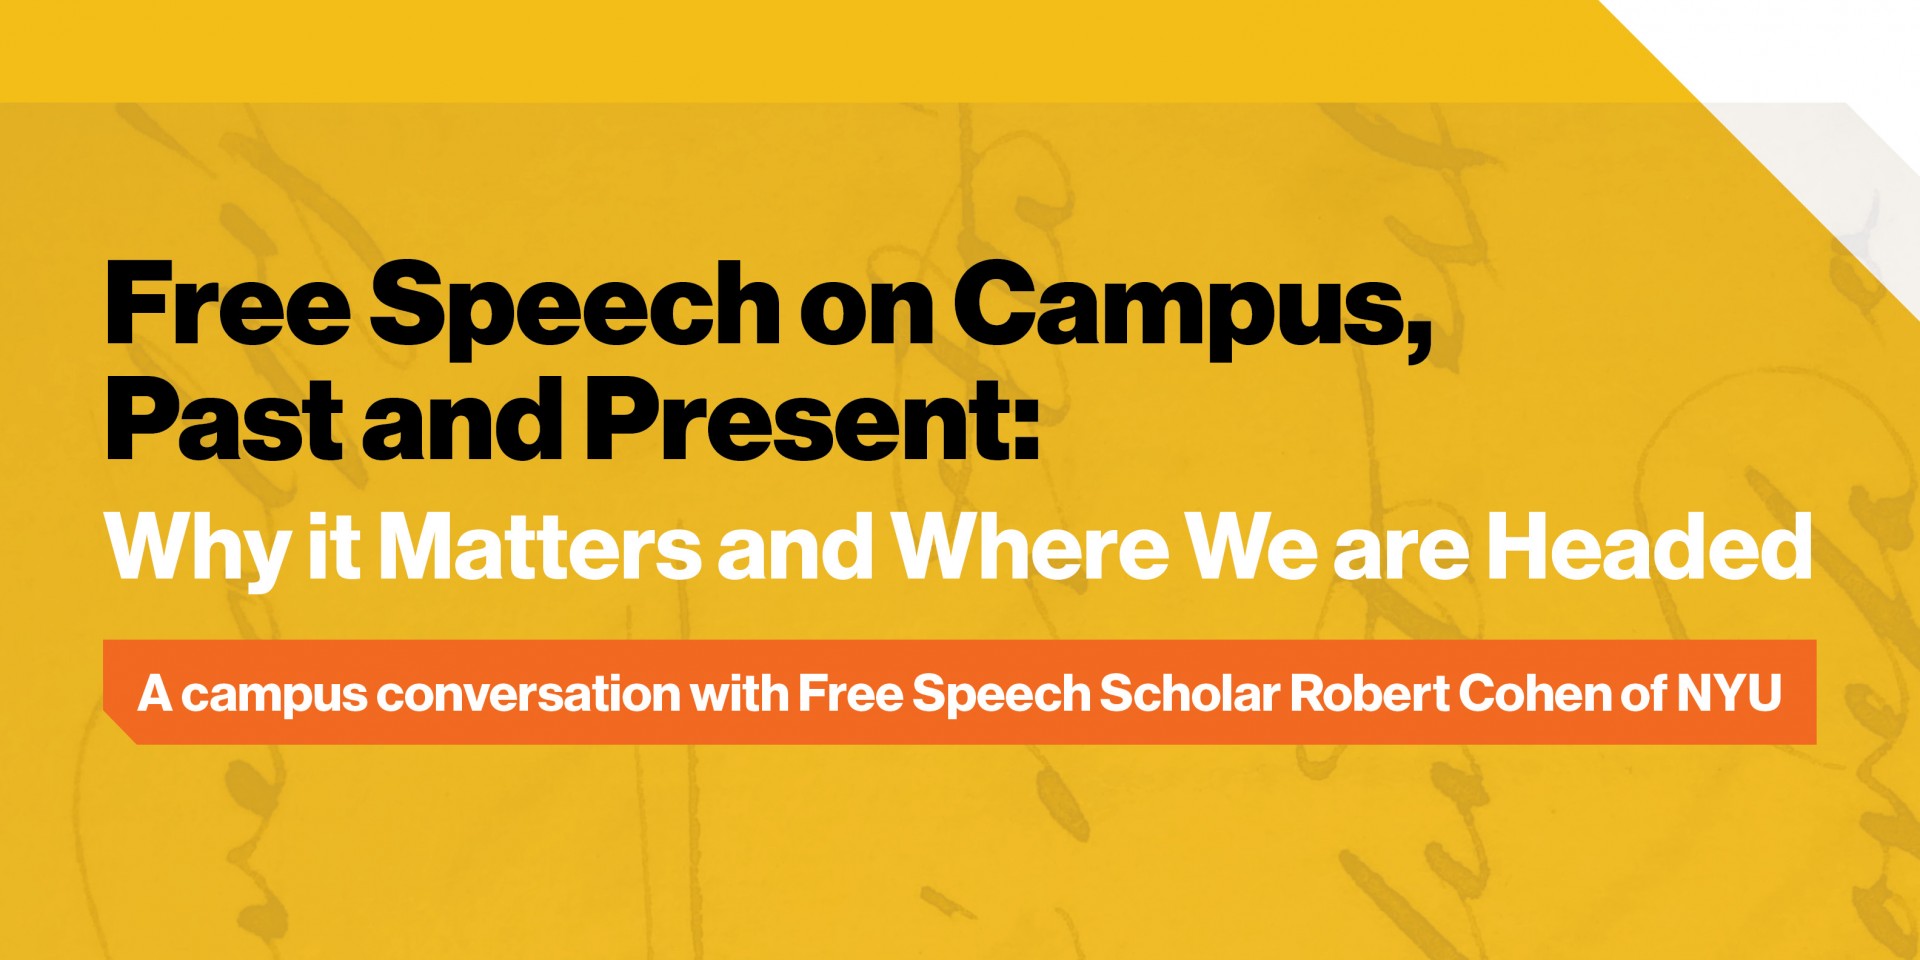 Free Speech on Campus text graphic